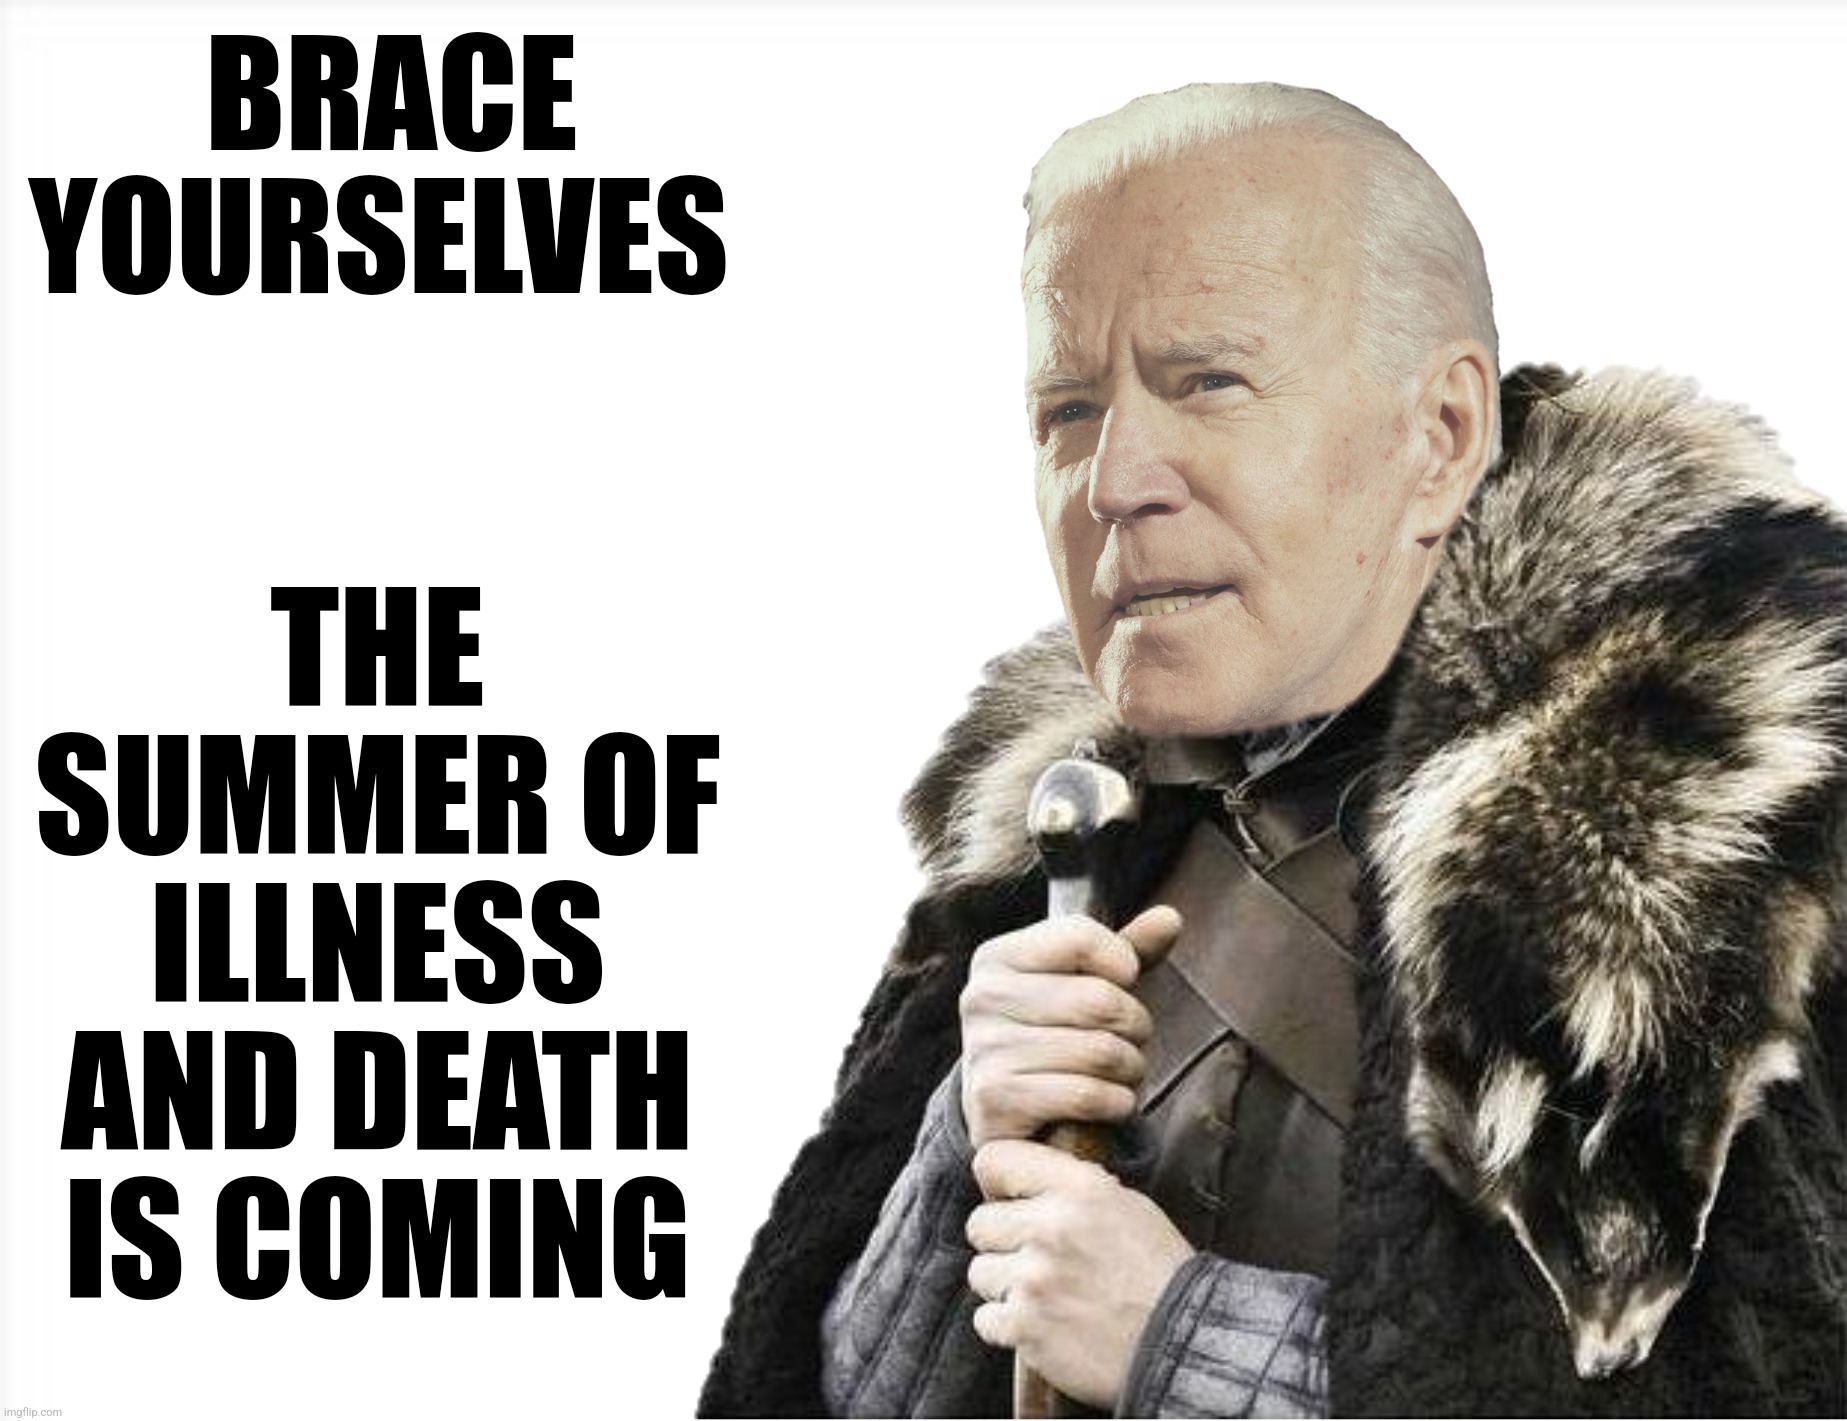 BRACE YOURSELVES THE SUMMER OF ILLNESS AND DEATH IS COMING | made w/ Imgflip meme maker